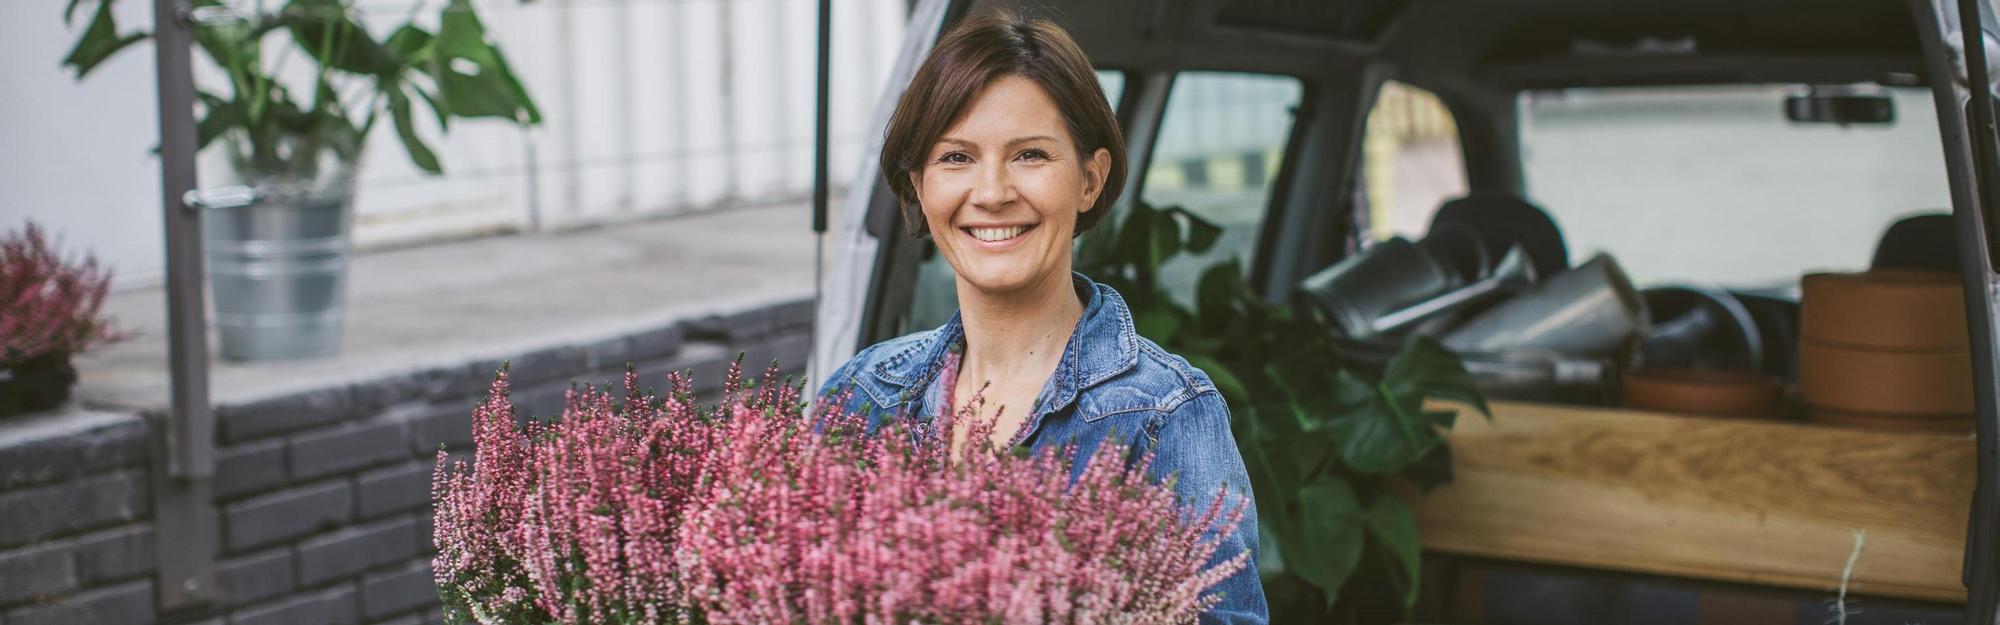 Smiling woman loading car trunk filled with different type of flowers.